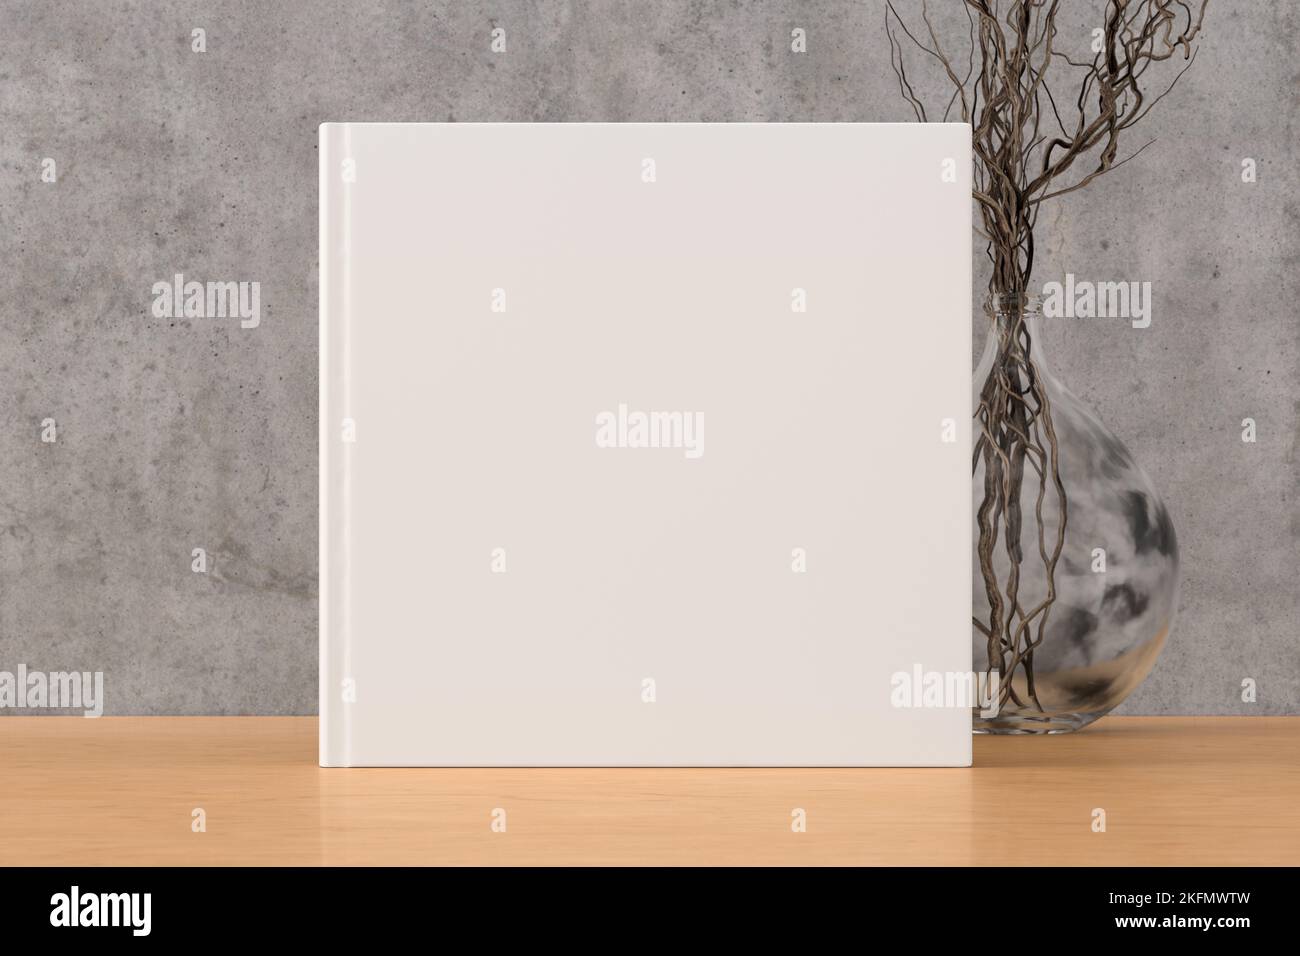 Square book cover mock up standing on a wooden desk with concrete wall background Stock Photo